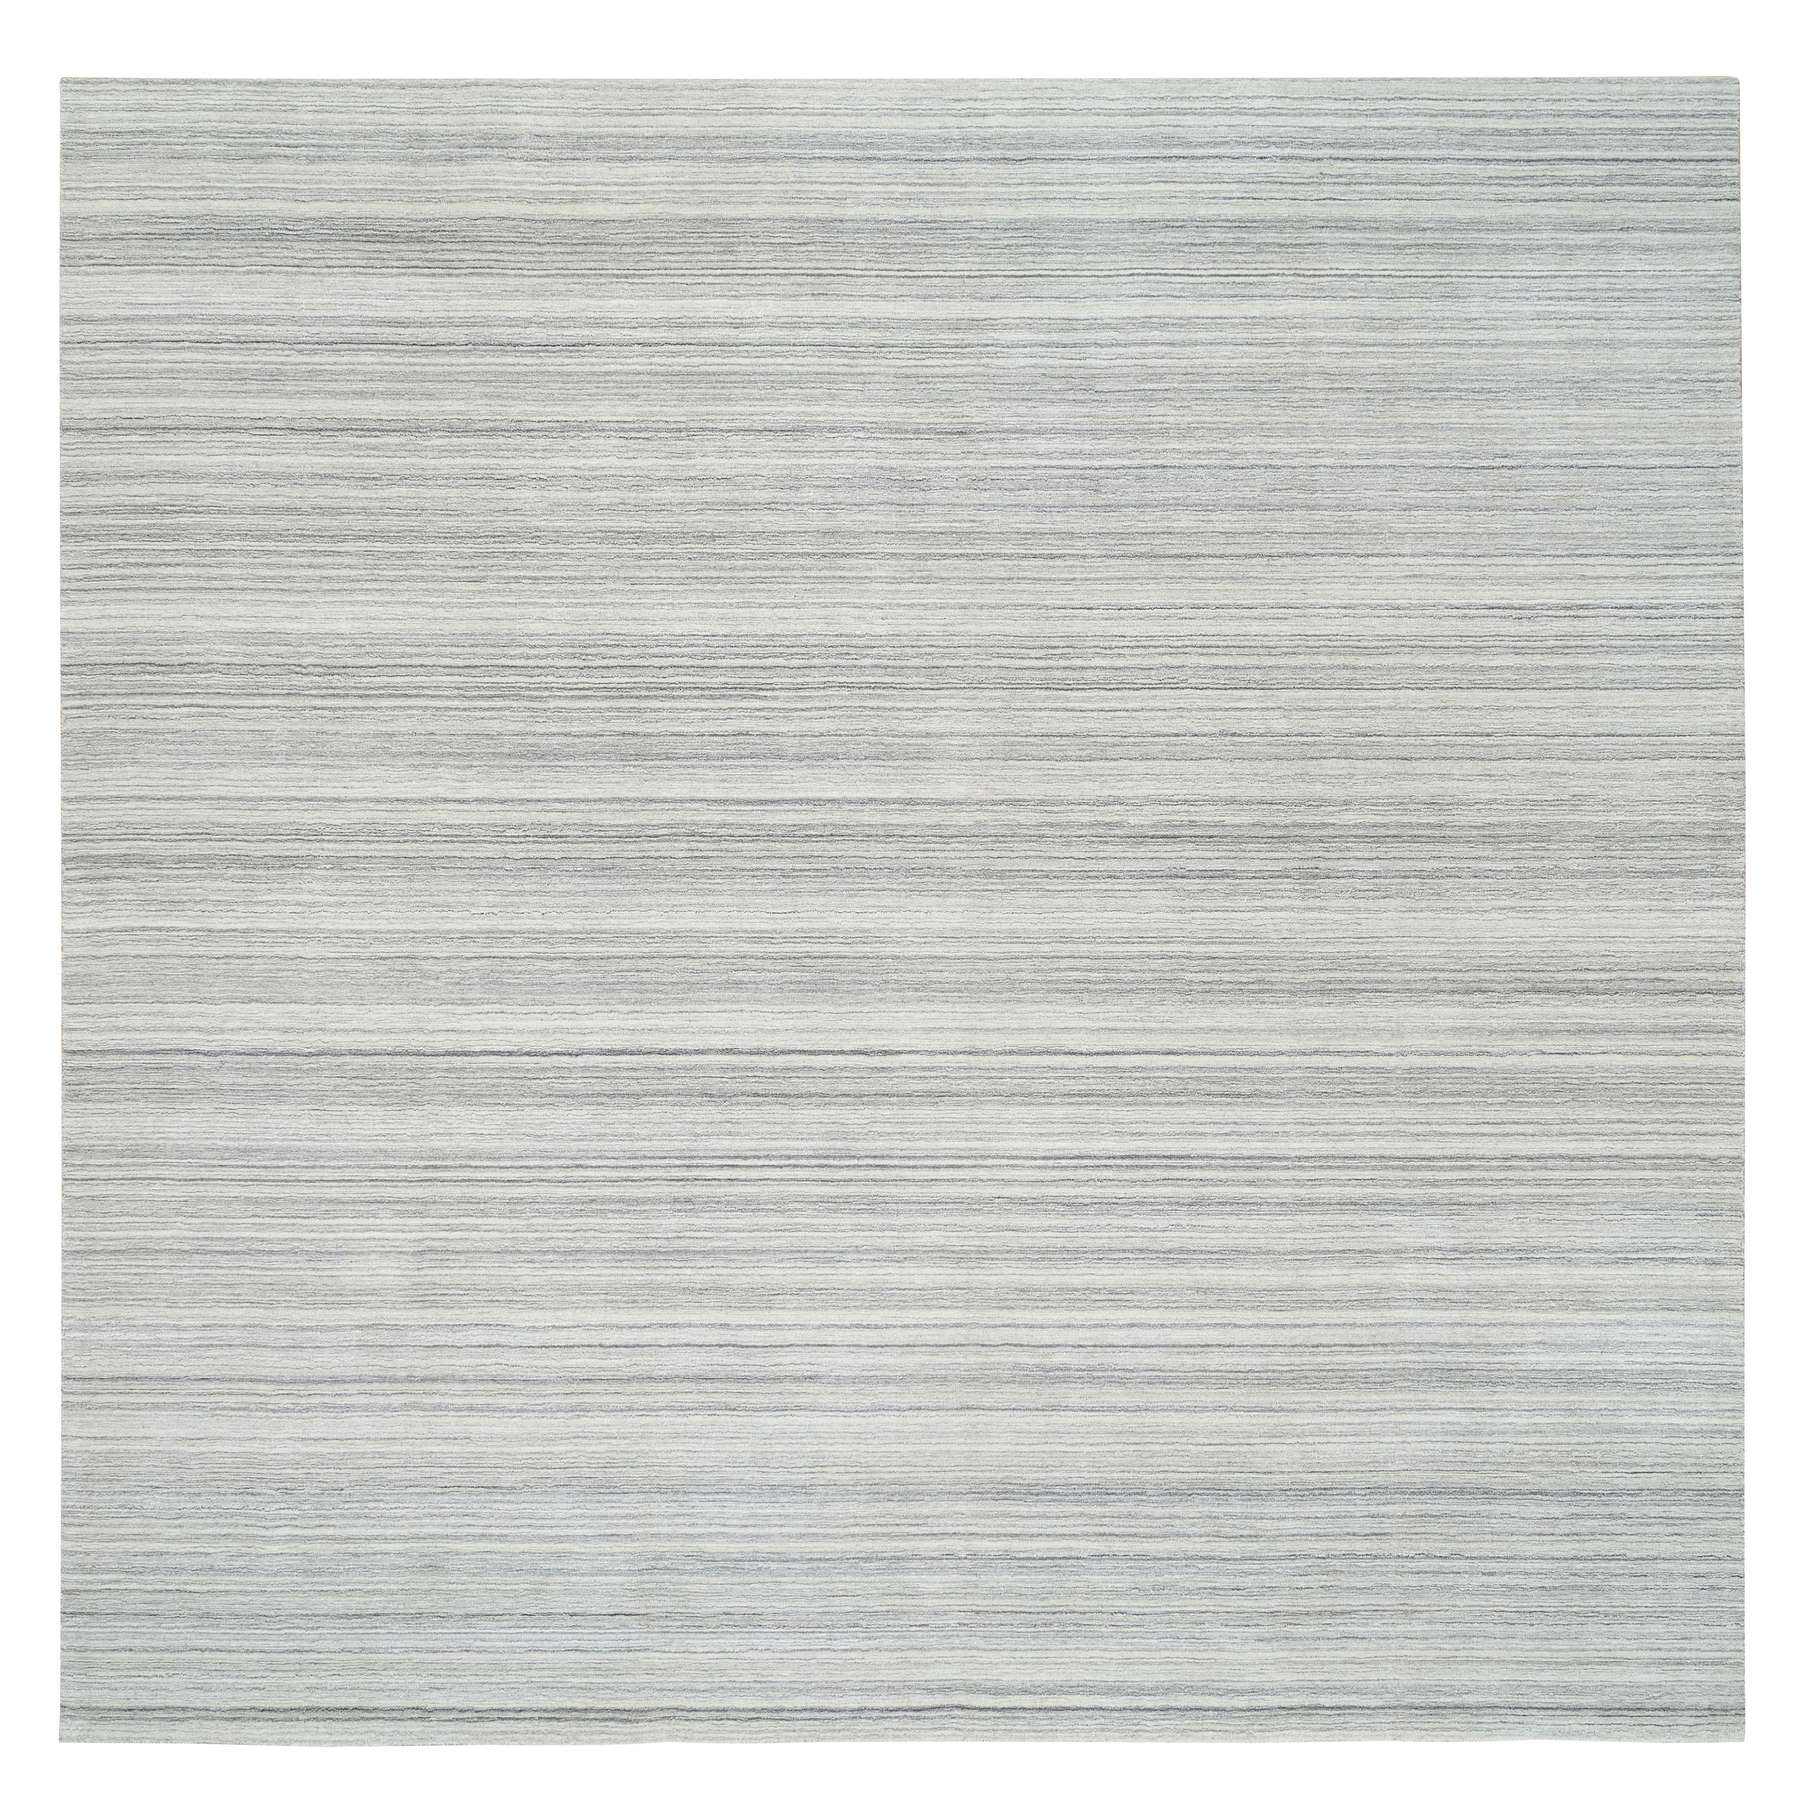 12'x12' Platinum Gray and Cream, Undyed Natural Wool Modern Design, Thick and Plush Plain Hand Loomed, Square Oriental Rug 